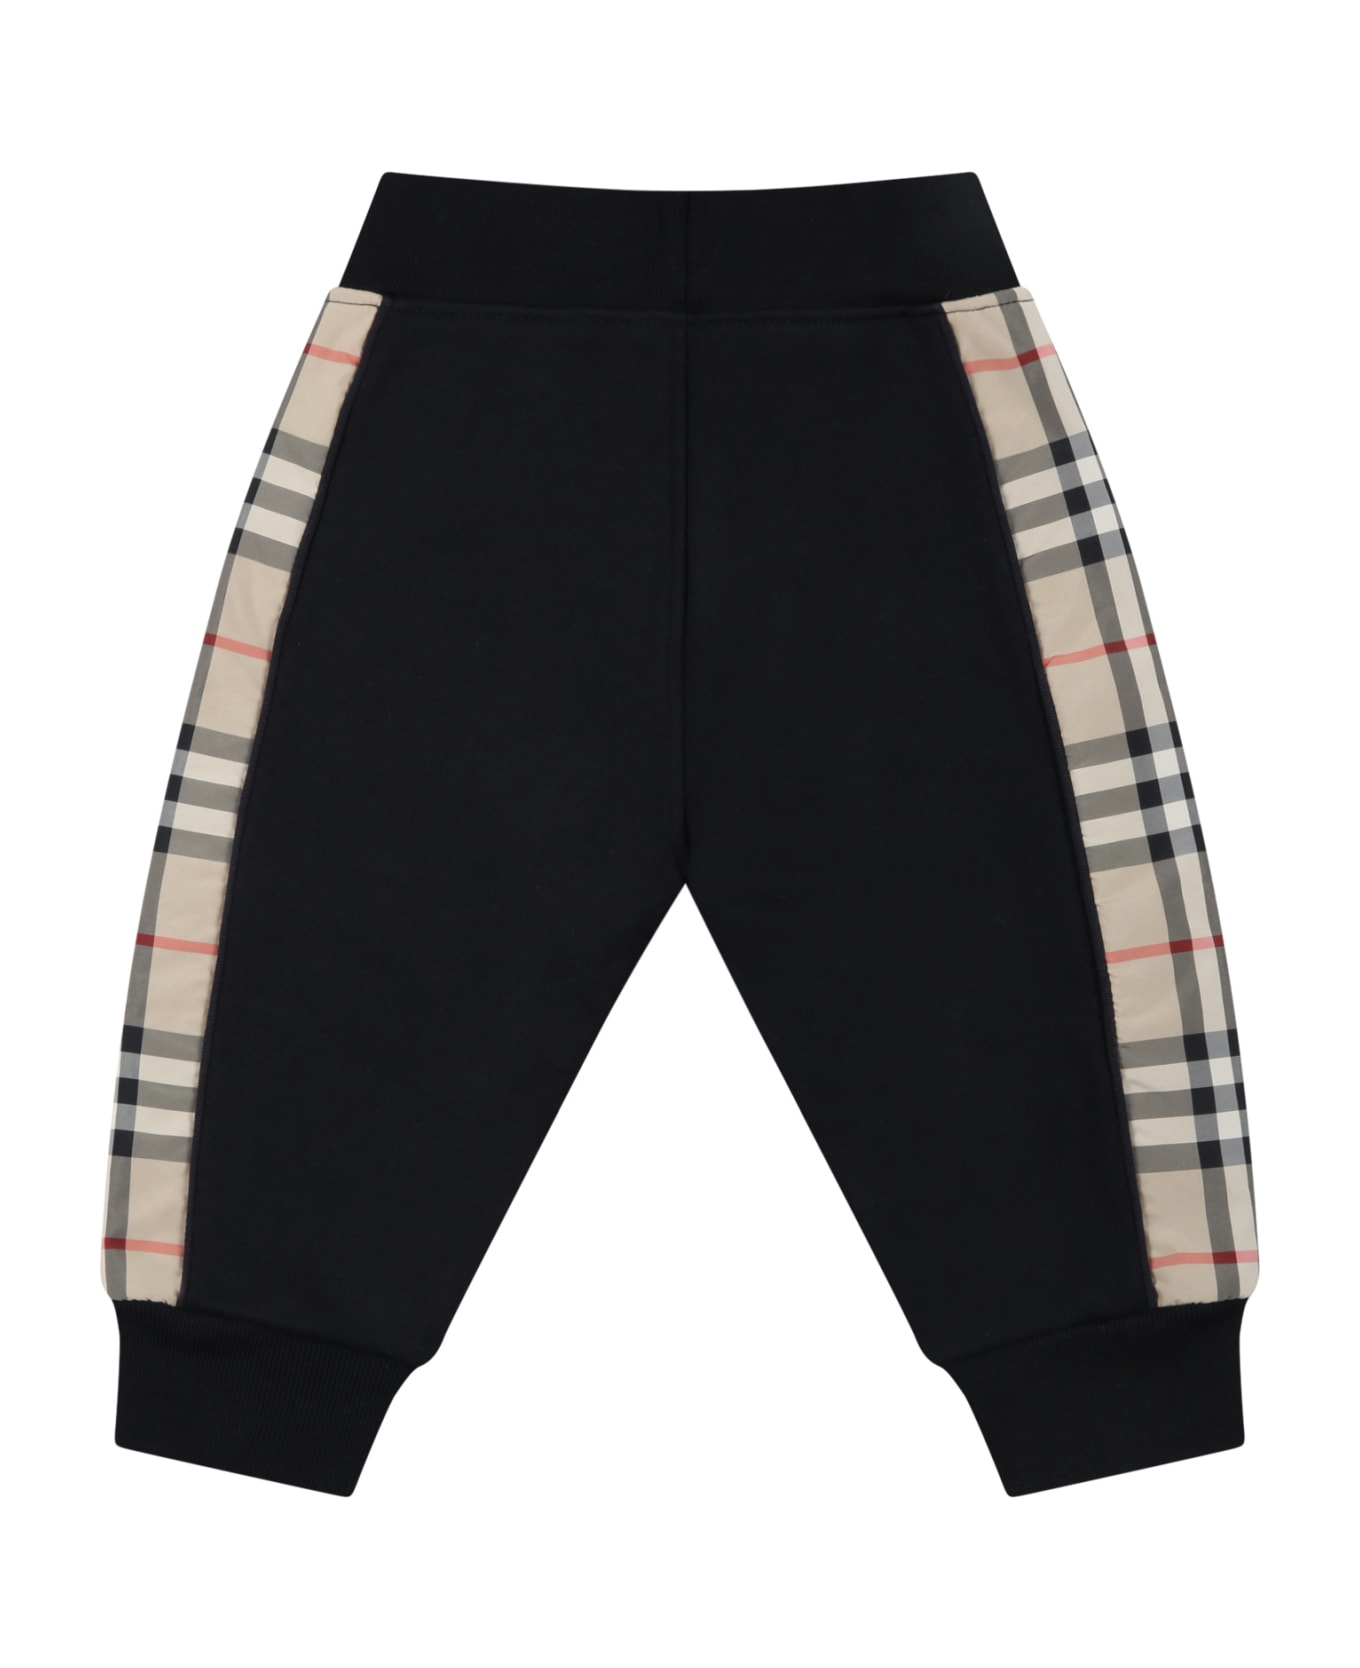 Burberry Black Sweatpants For Babies With Vintage Check - Black